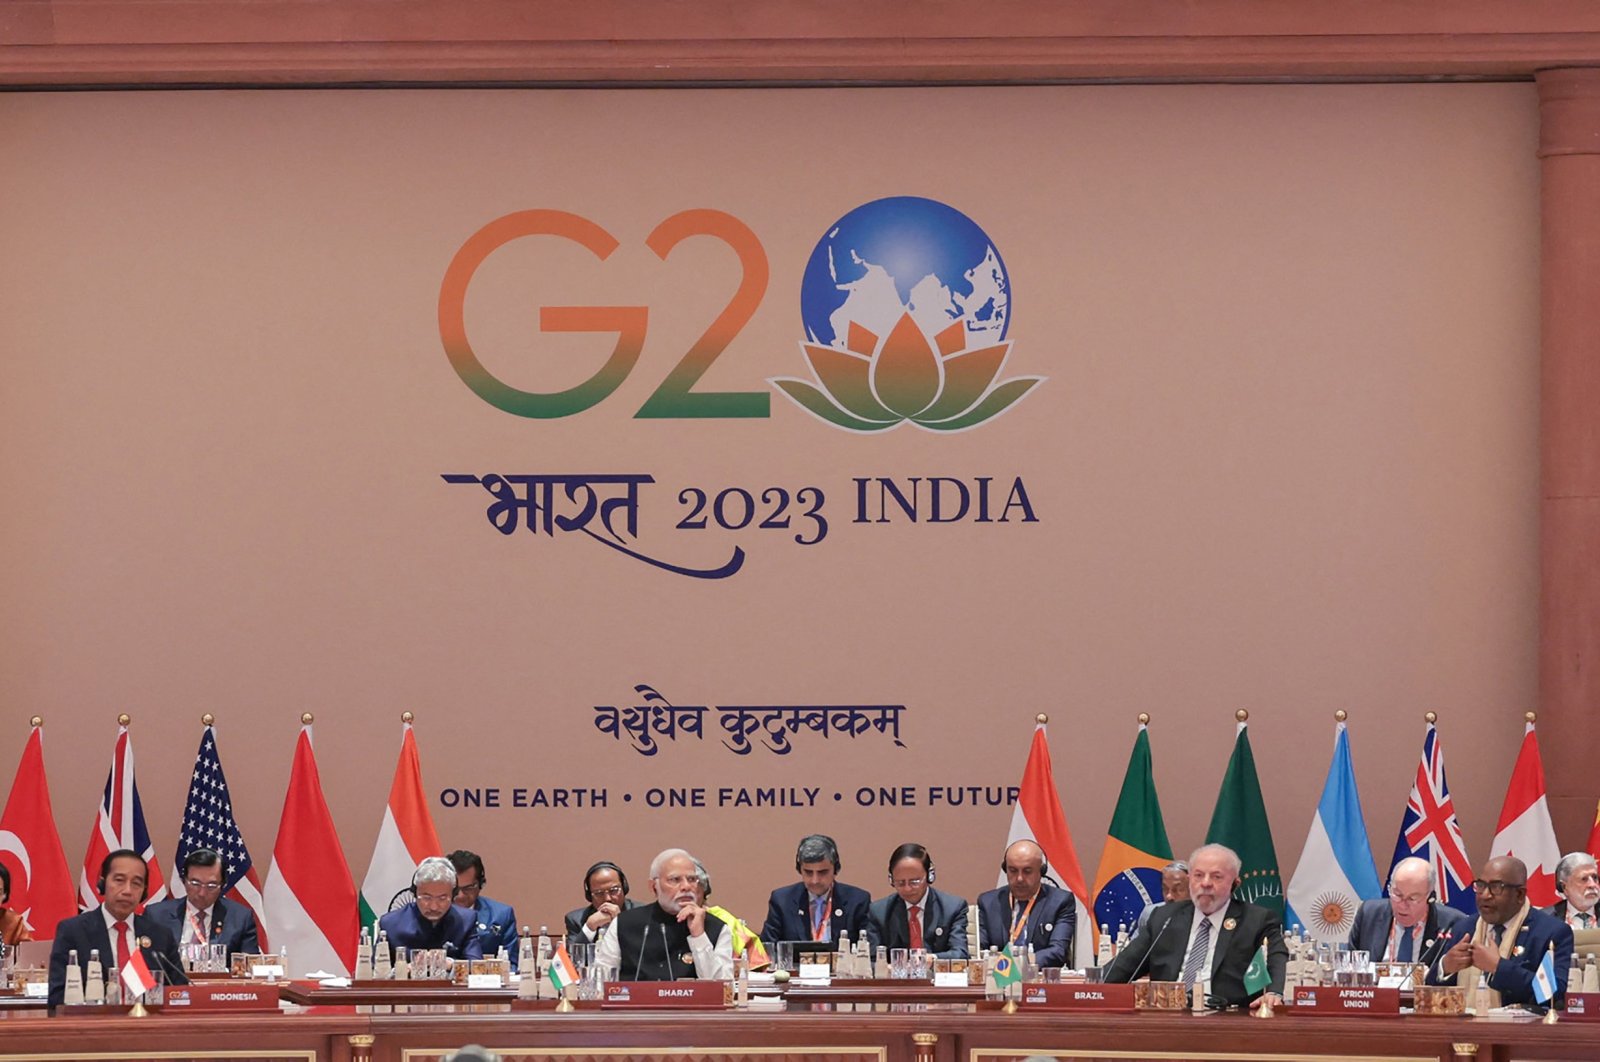 India&#039;s Prime Minister Narendra Modi (C) along with world leaders attends the closing session of the G20 Leaders&#039; Summit in New Delhi, India, Sept. 10, 2023. (AFP Photo)